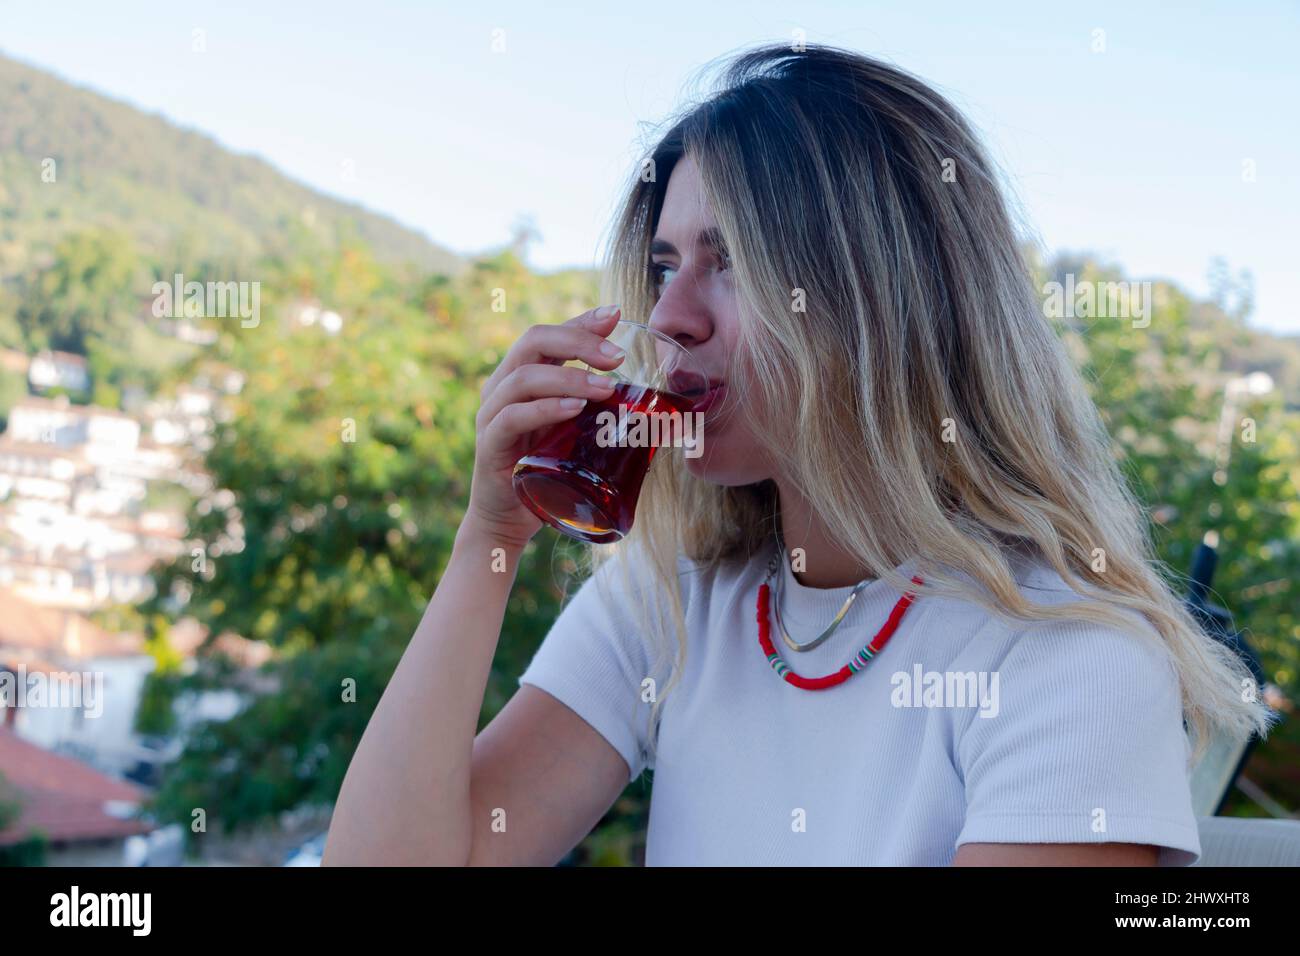 A blonde girl drinking red turkish tea in nature. The weather is sunny. She is looking forward. Stock Photo